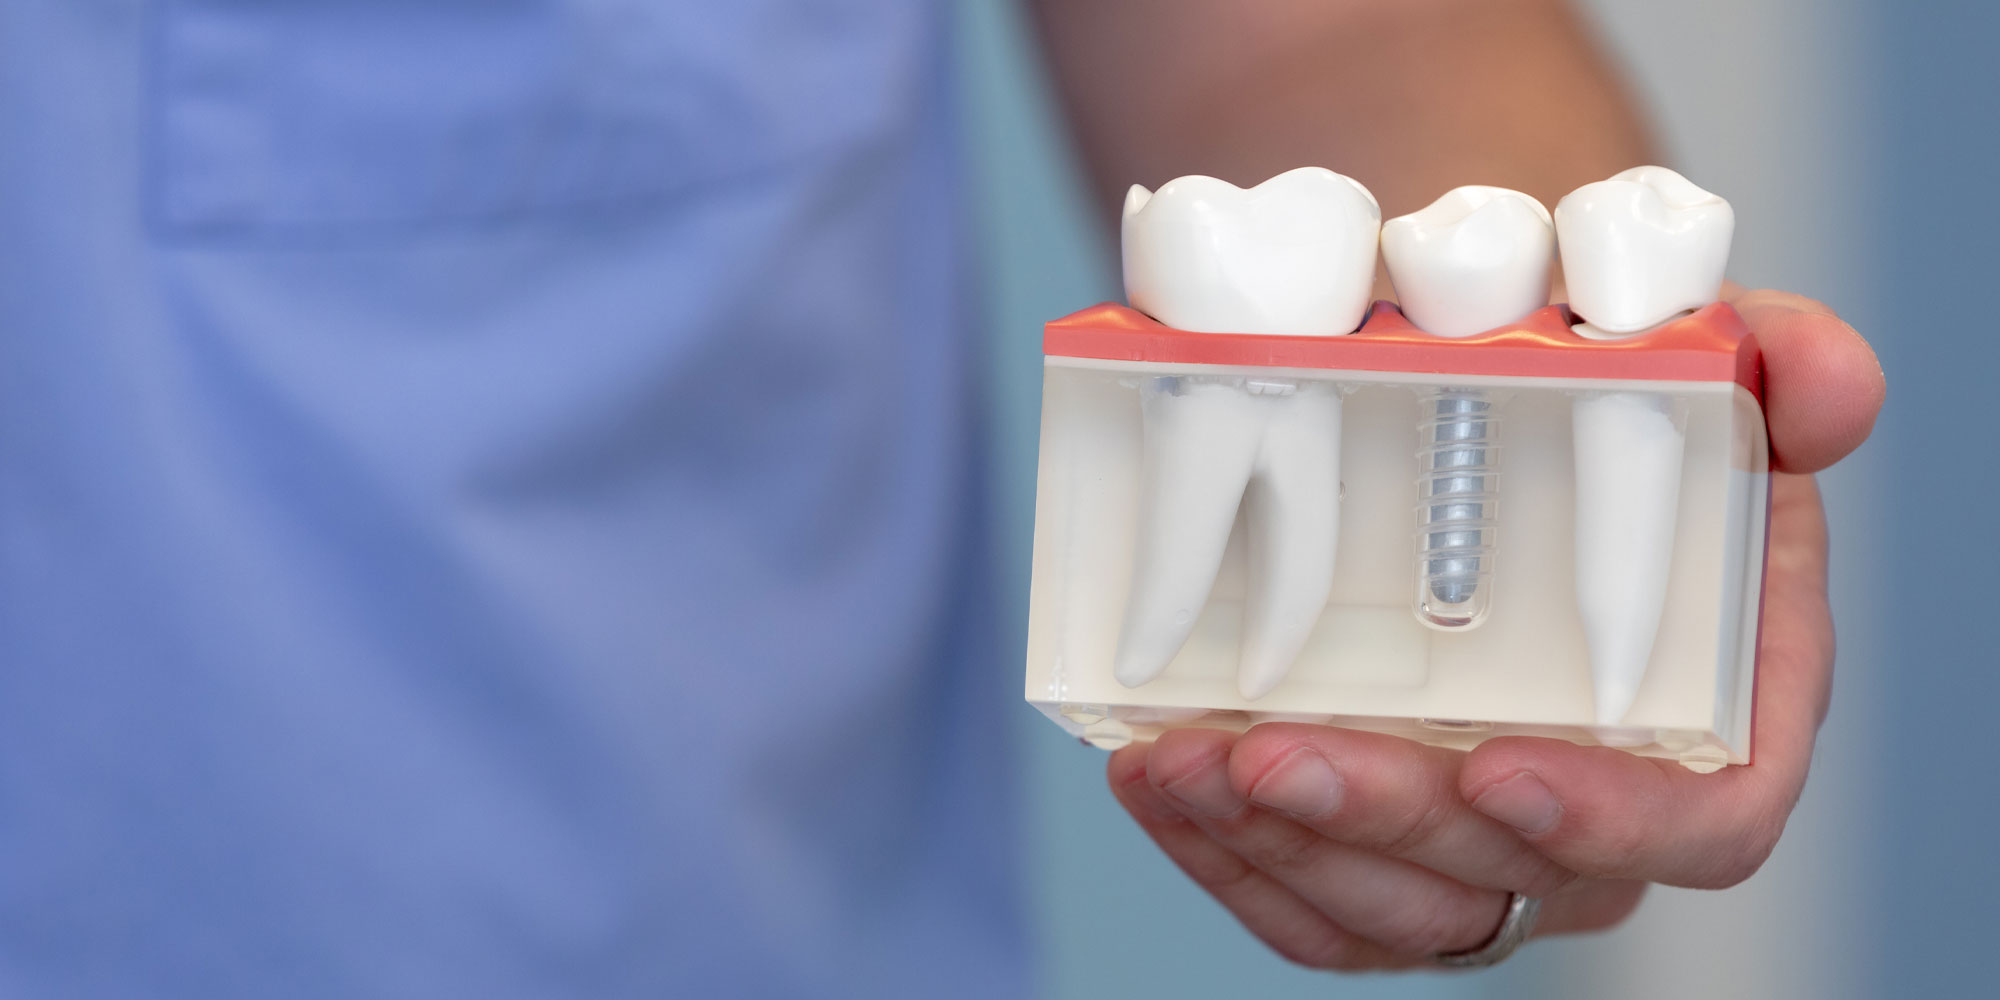 Can I Have A New Smile In One Day With Full Mouth Dental Implants In Fort Lauderdale, FL?